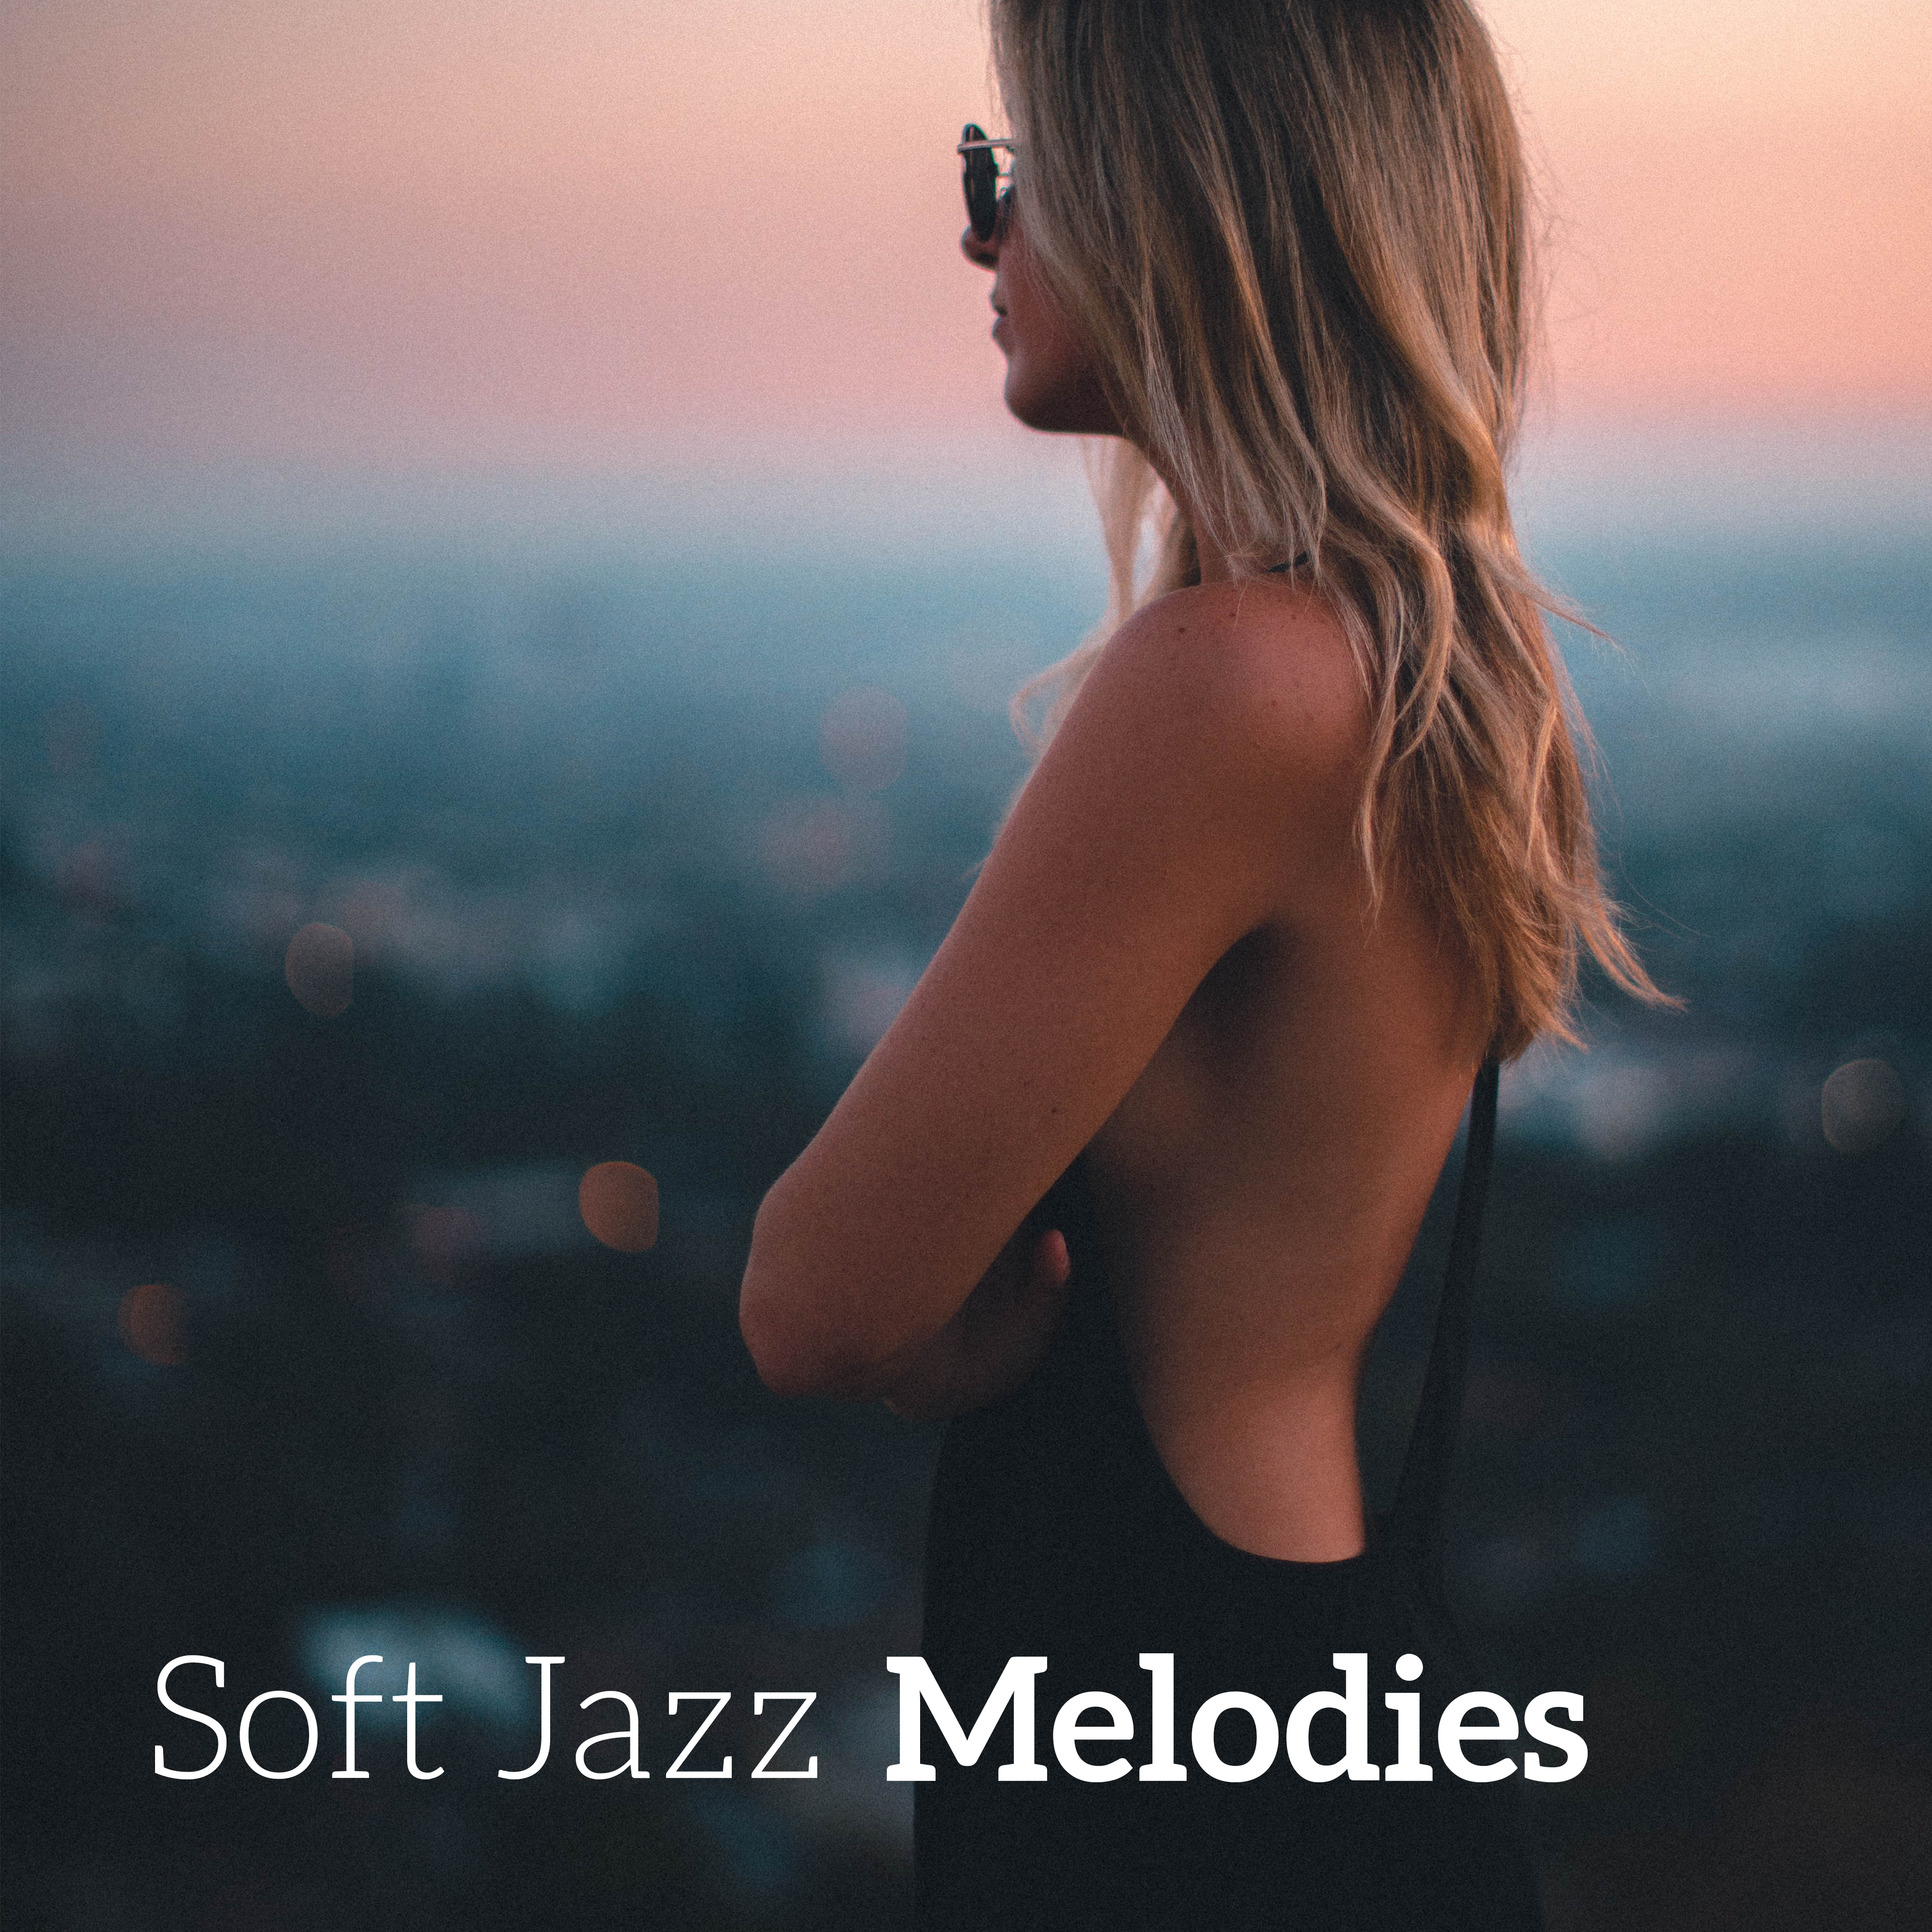 Soft Jazz Melodies  Calm Down with Jazz, Best Background Music, Soothing Sounds to Relax